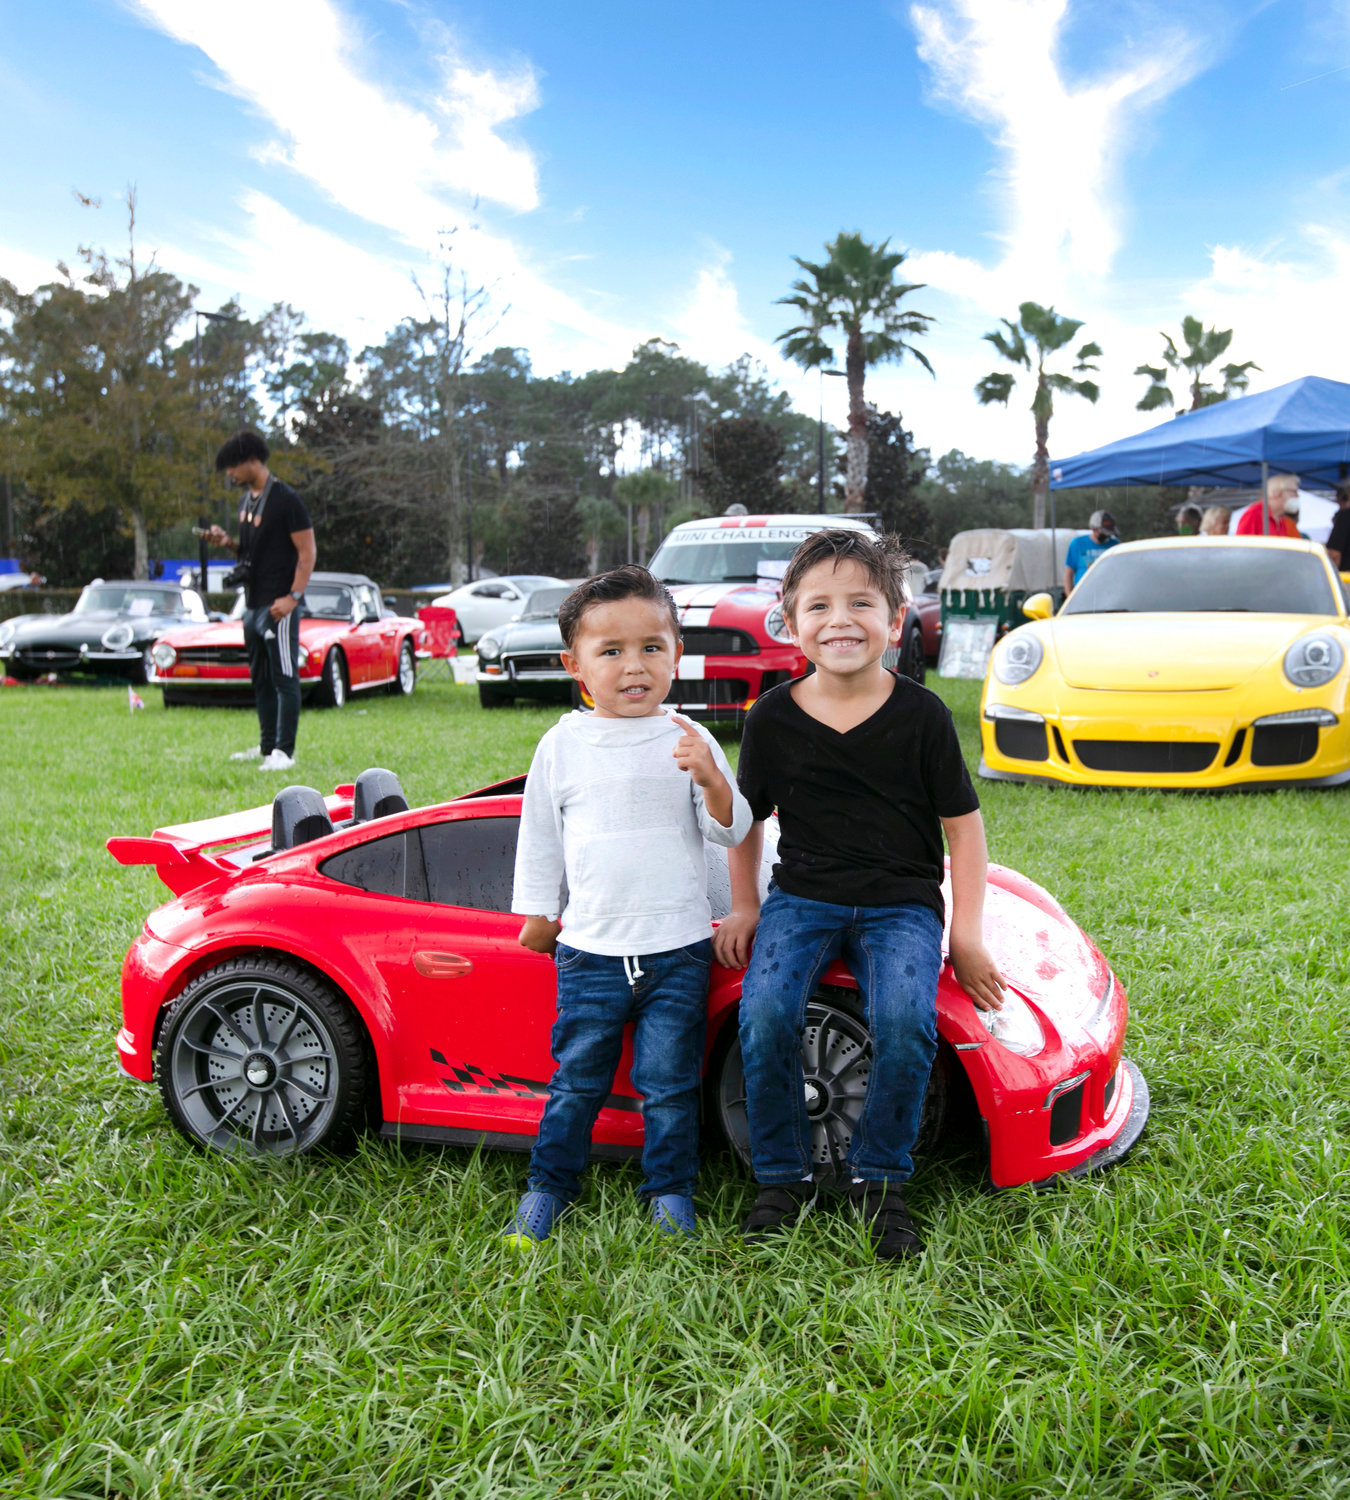 The auto show was fun for all ages.